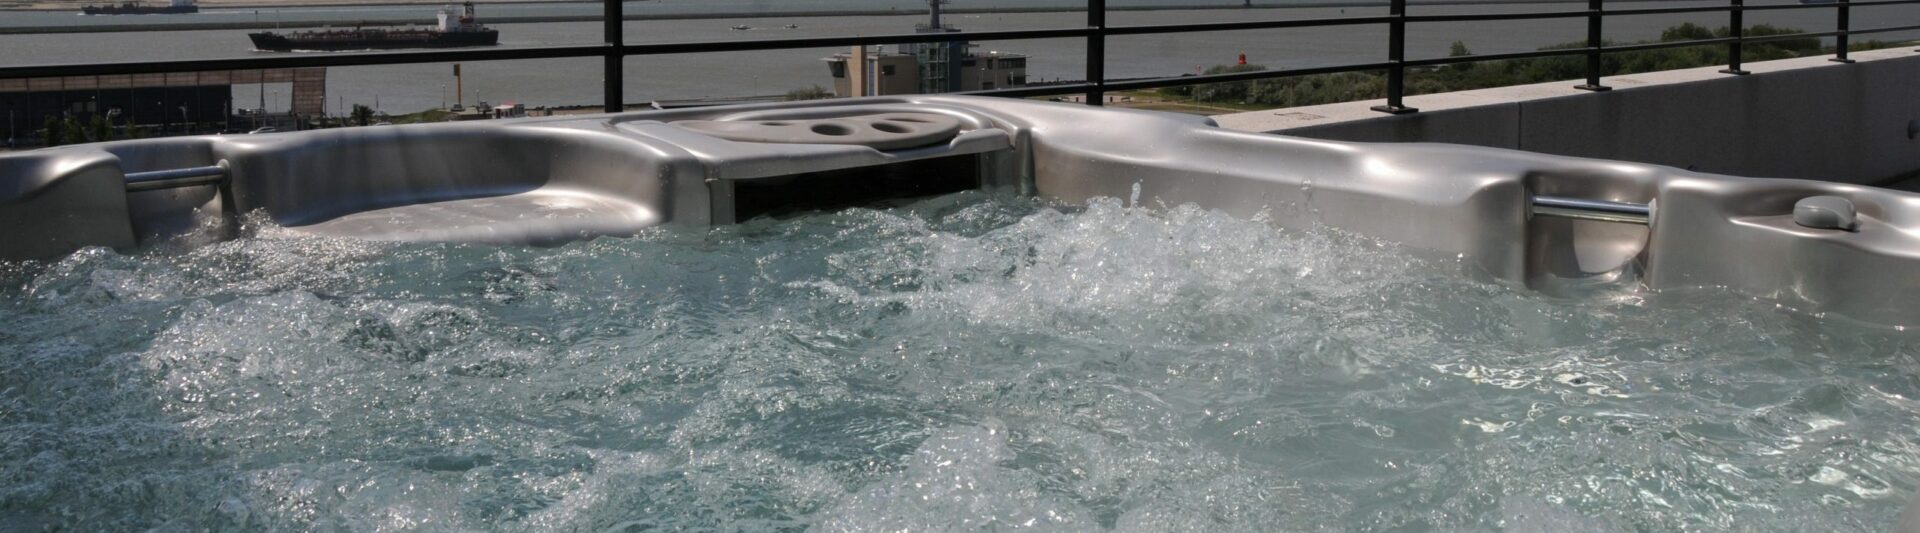 hard water in the hot tub